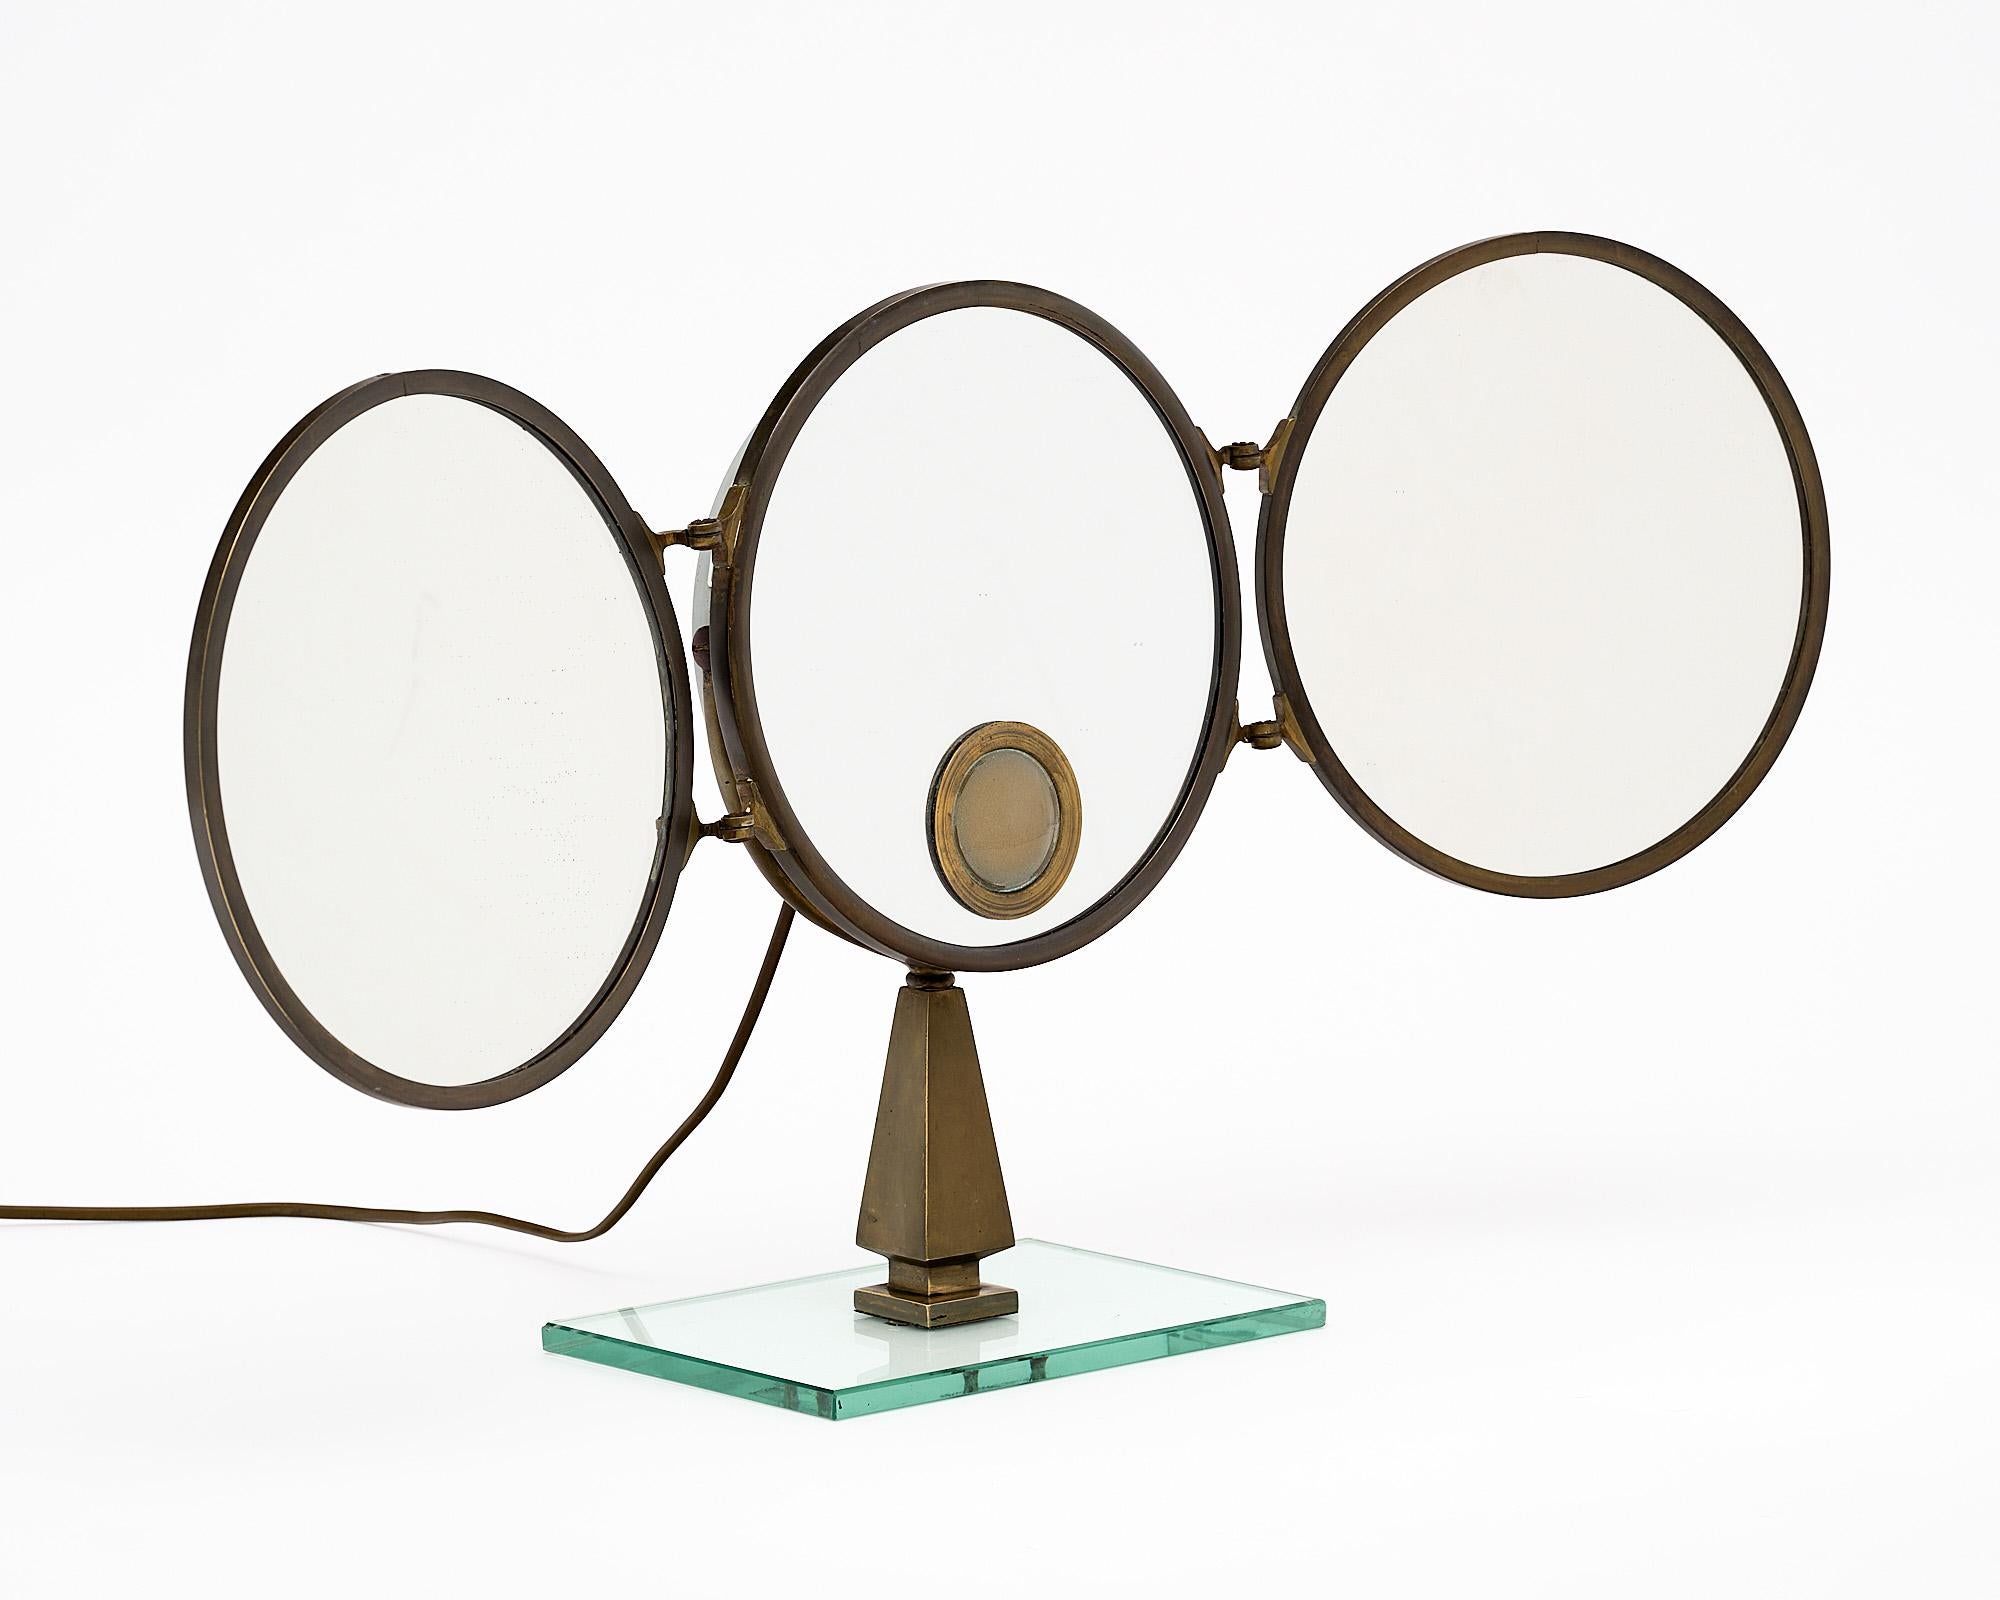 Vanity mirror, French, made of three solid circular brass structures holding mirrors. This triptych piece is articulated. The central mirror features a glass covered cavity equipped with a small socket and bulb. It is supported by a triangular solid